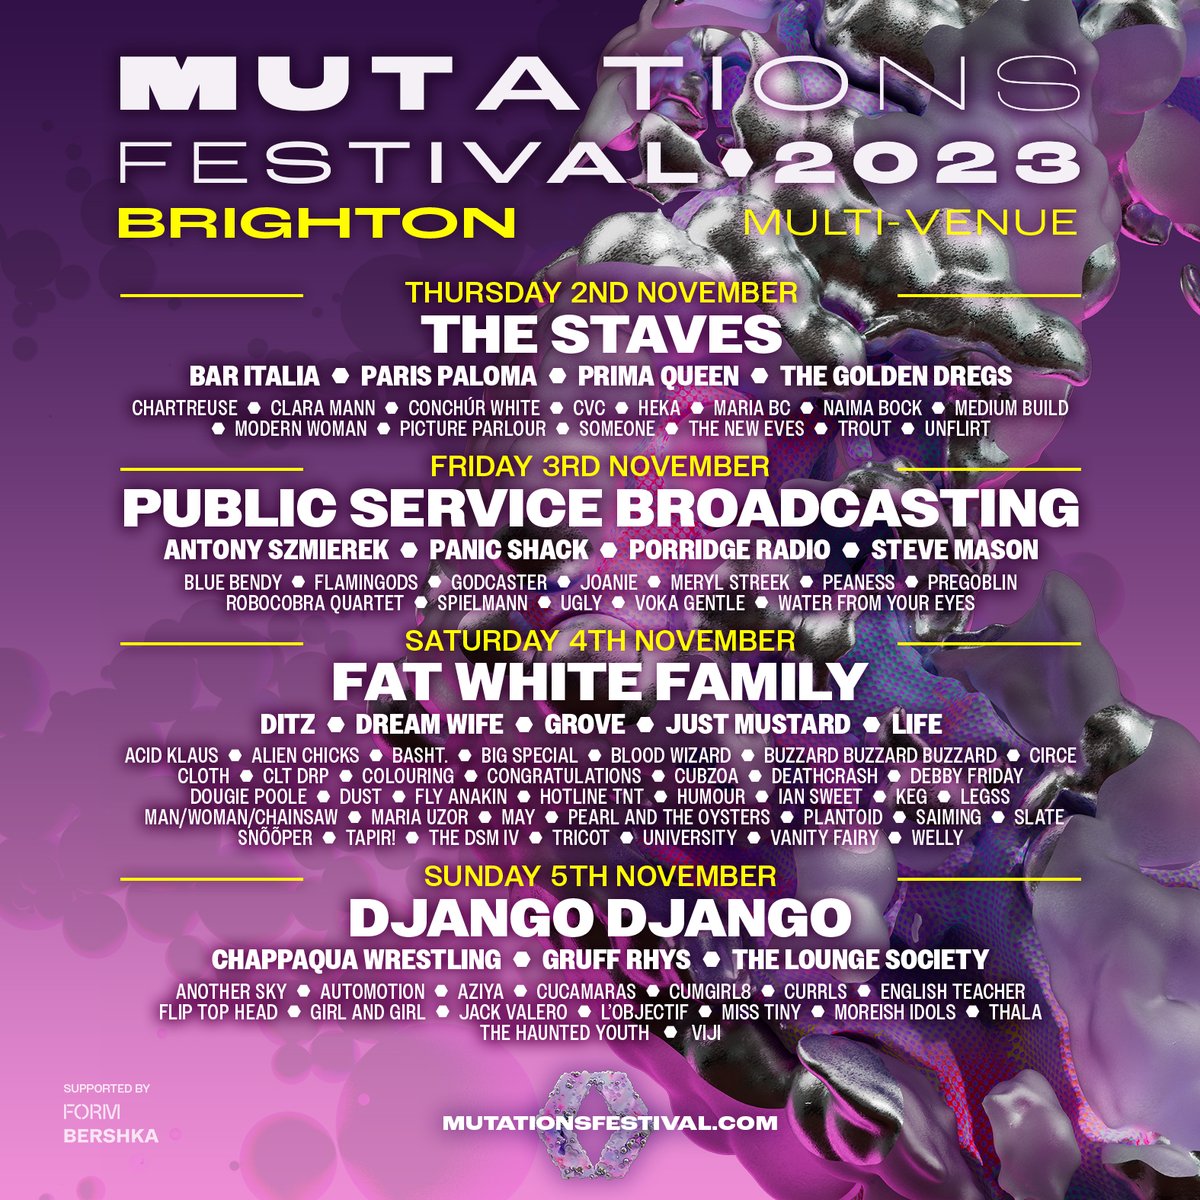 Excited to confirm that I will be performing at Brighton’s @mutationsfest 2023 this November alongside some incredible acts across a huge line-up. Tickets on-sale Friday 10am at mutationsfestival.com #stevemason #betaband #brighton #mutationsfestival